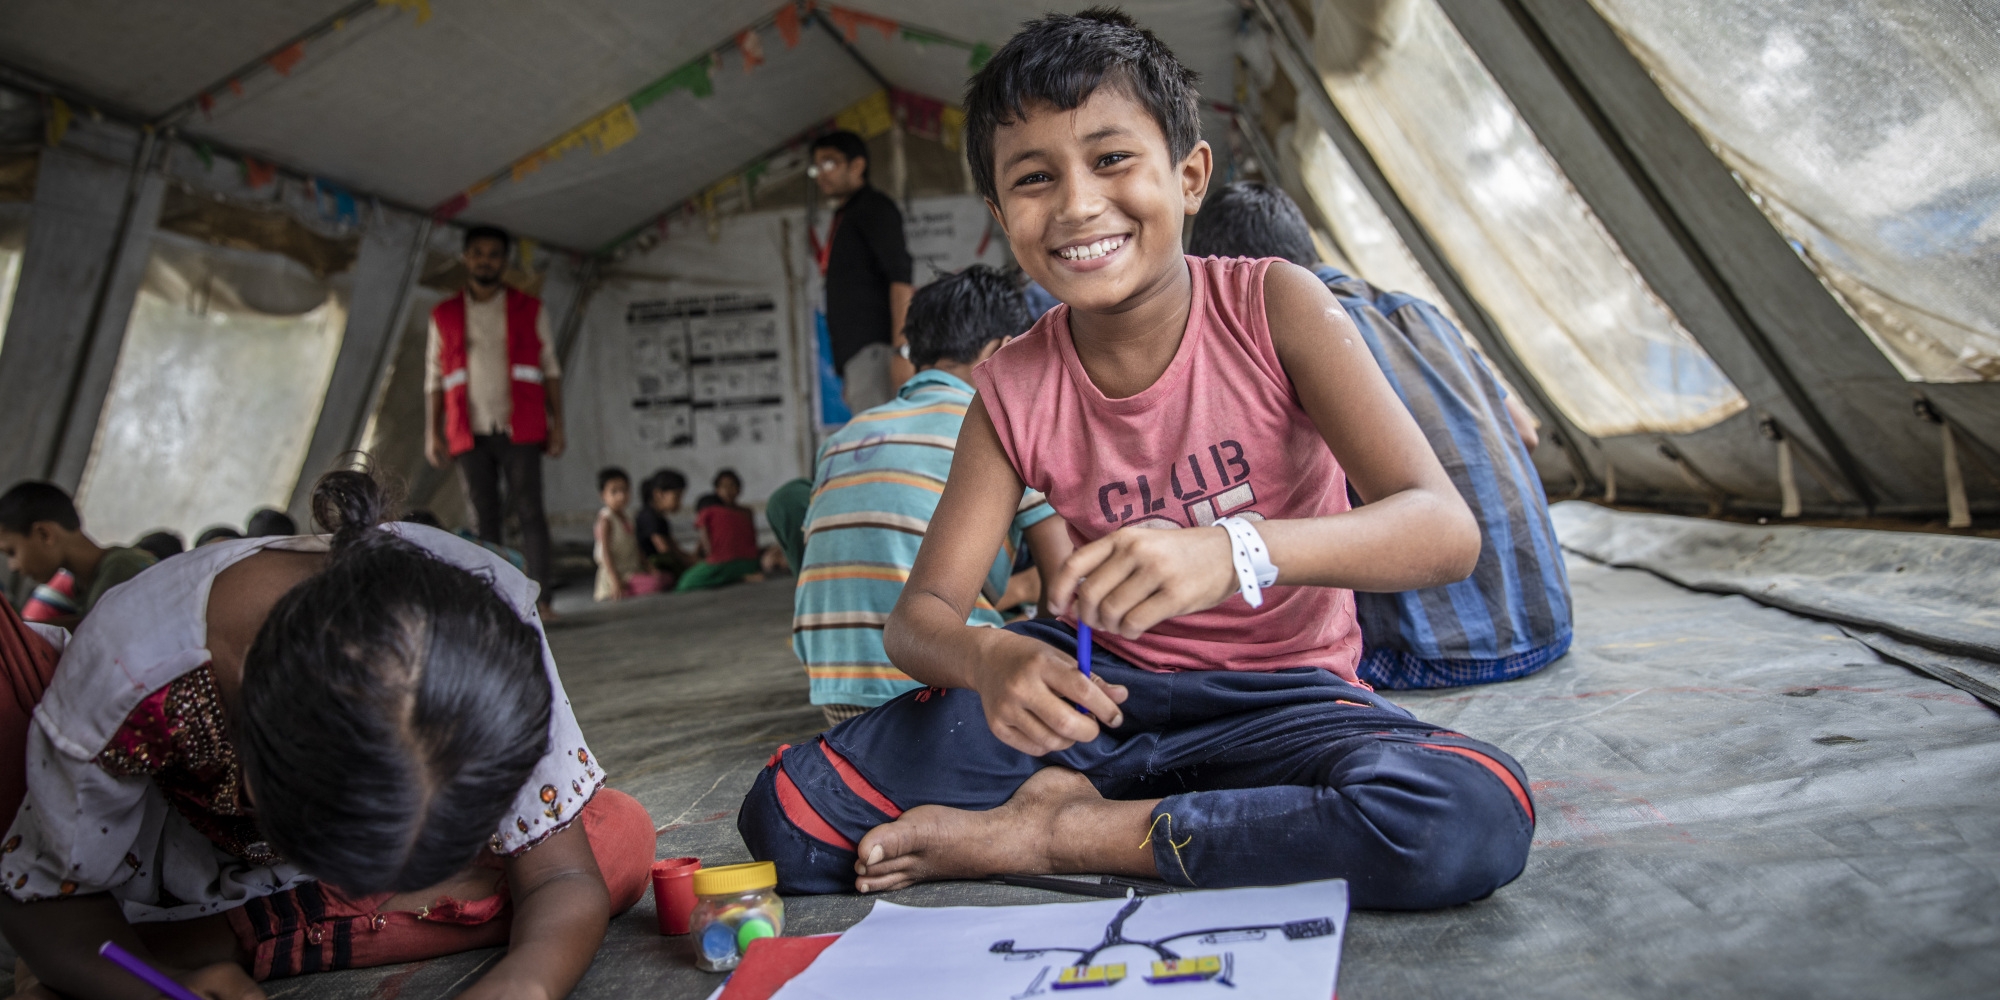 Nur*, 11, takes part in activities at Save the Children’s Child Friendly Space, in a Rohingya refugee camp in Bangladesh. Nur*, who has been deaf since birth, became separated from his parents after their village was attacked in Myanmar. He’s now living with extended family. Nur* receives support from a Save the Children caseworker. Photo Credit: Jonathan Hyams / Save the Children 2018.